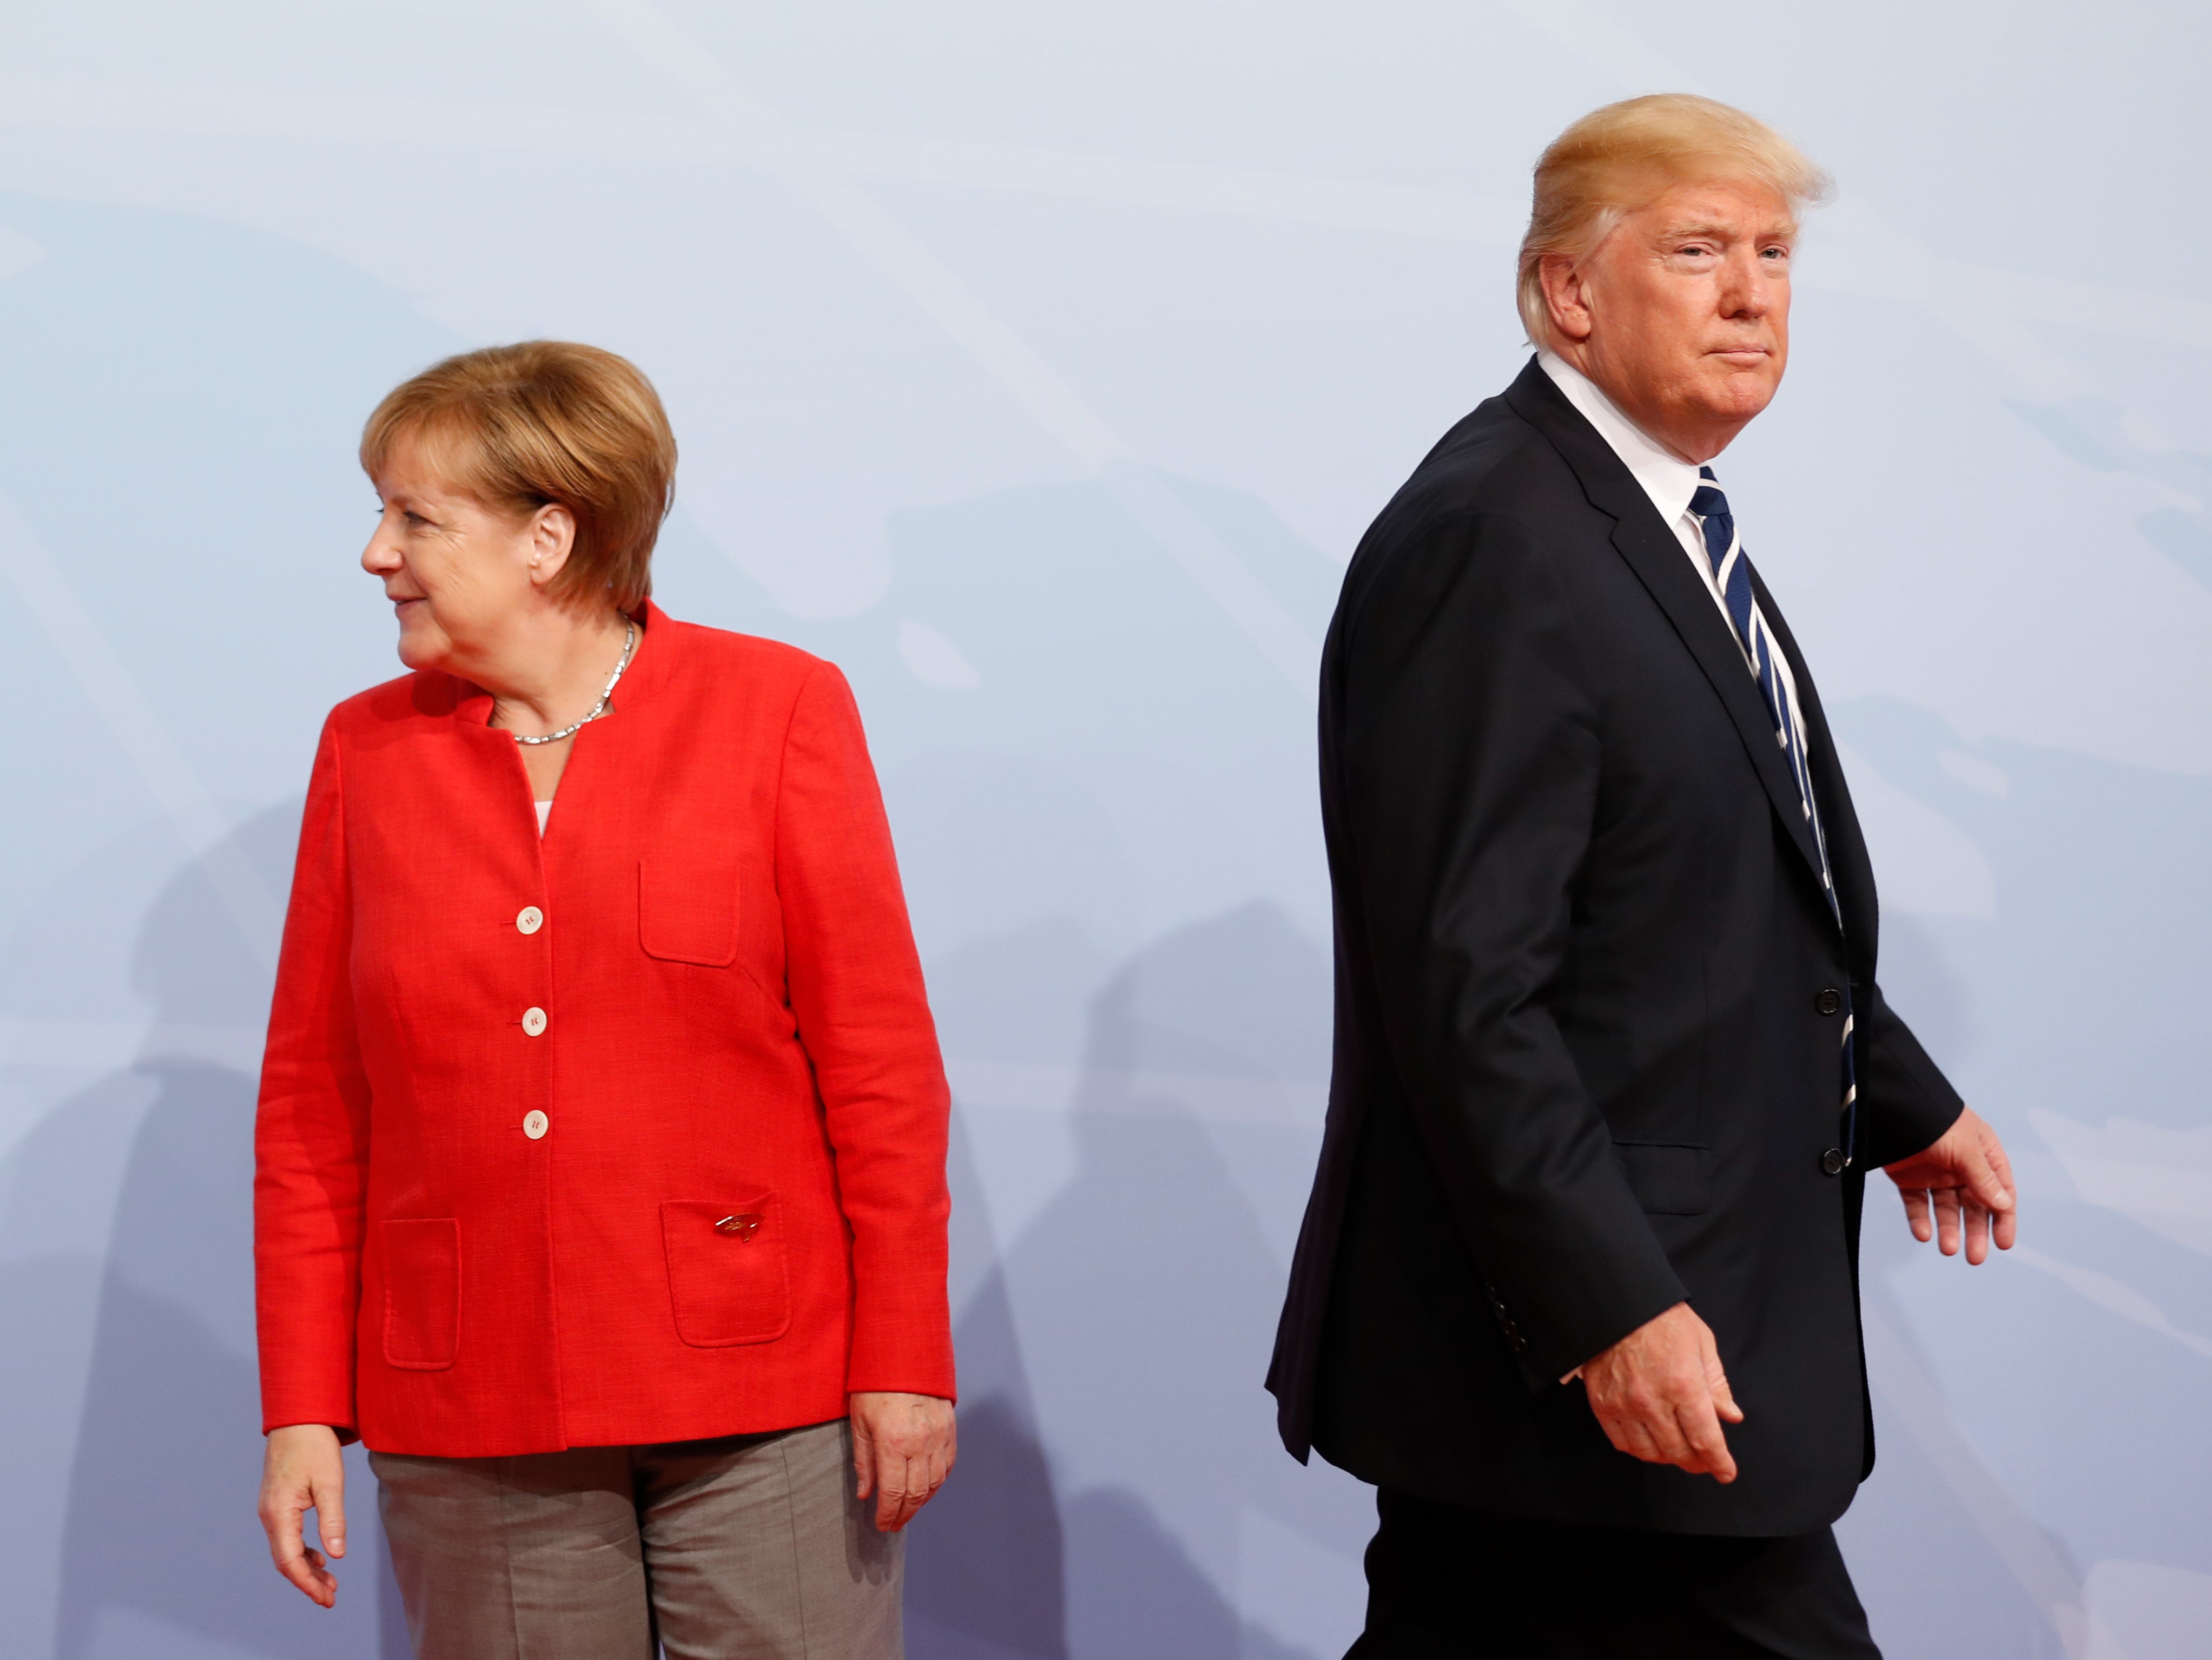 German Chancellor Angela Merkel officially welcomes US President Donald Trump to the opening day of the G20 summit on July 7, 2017 in Hamburg, Germany.